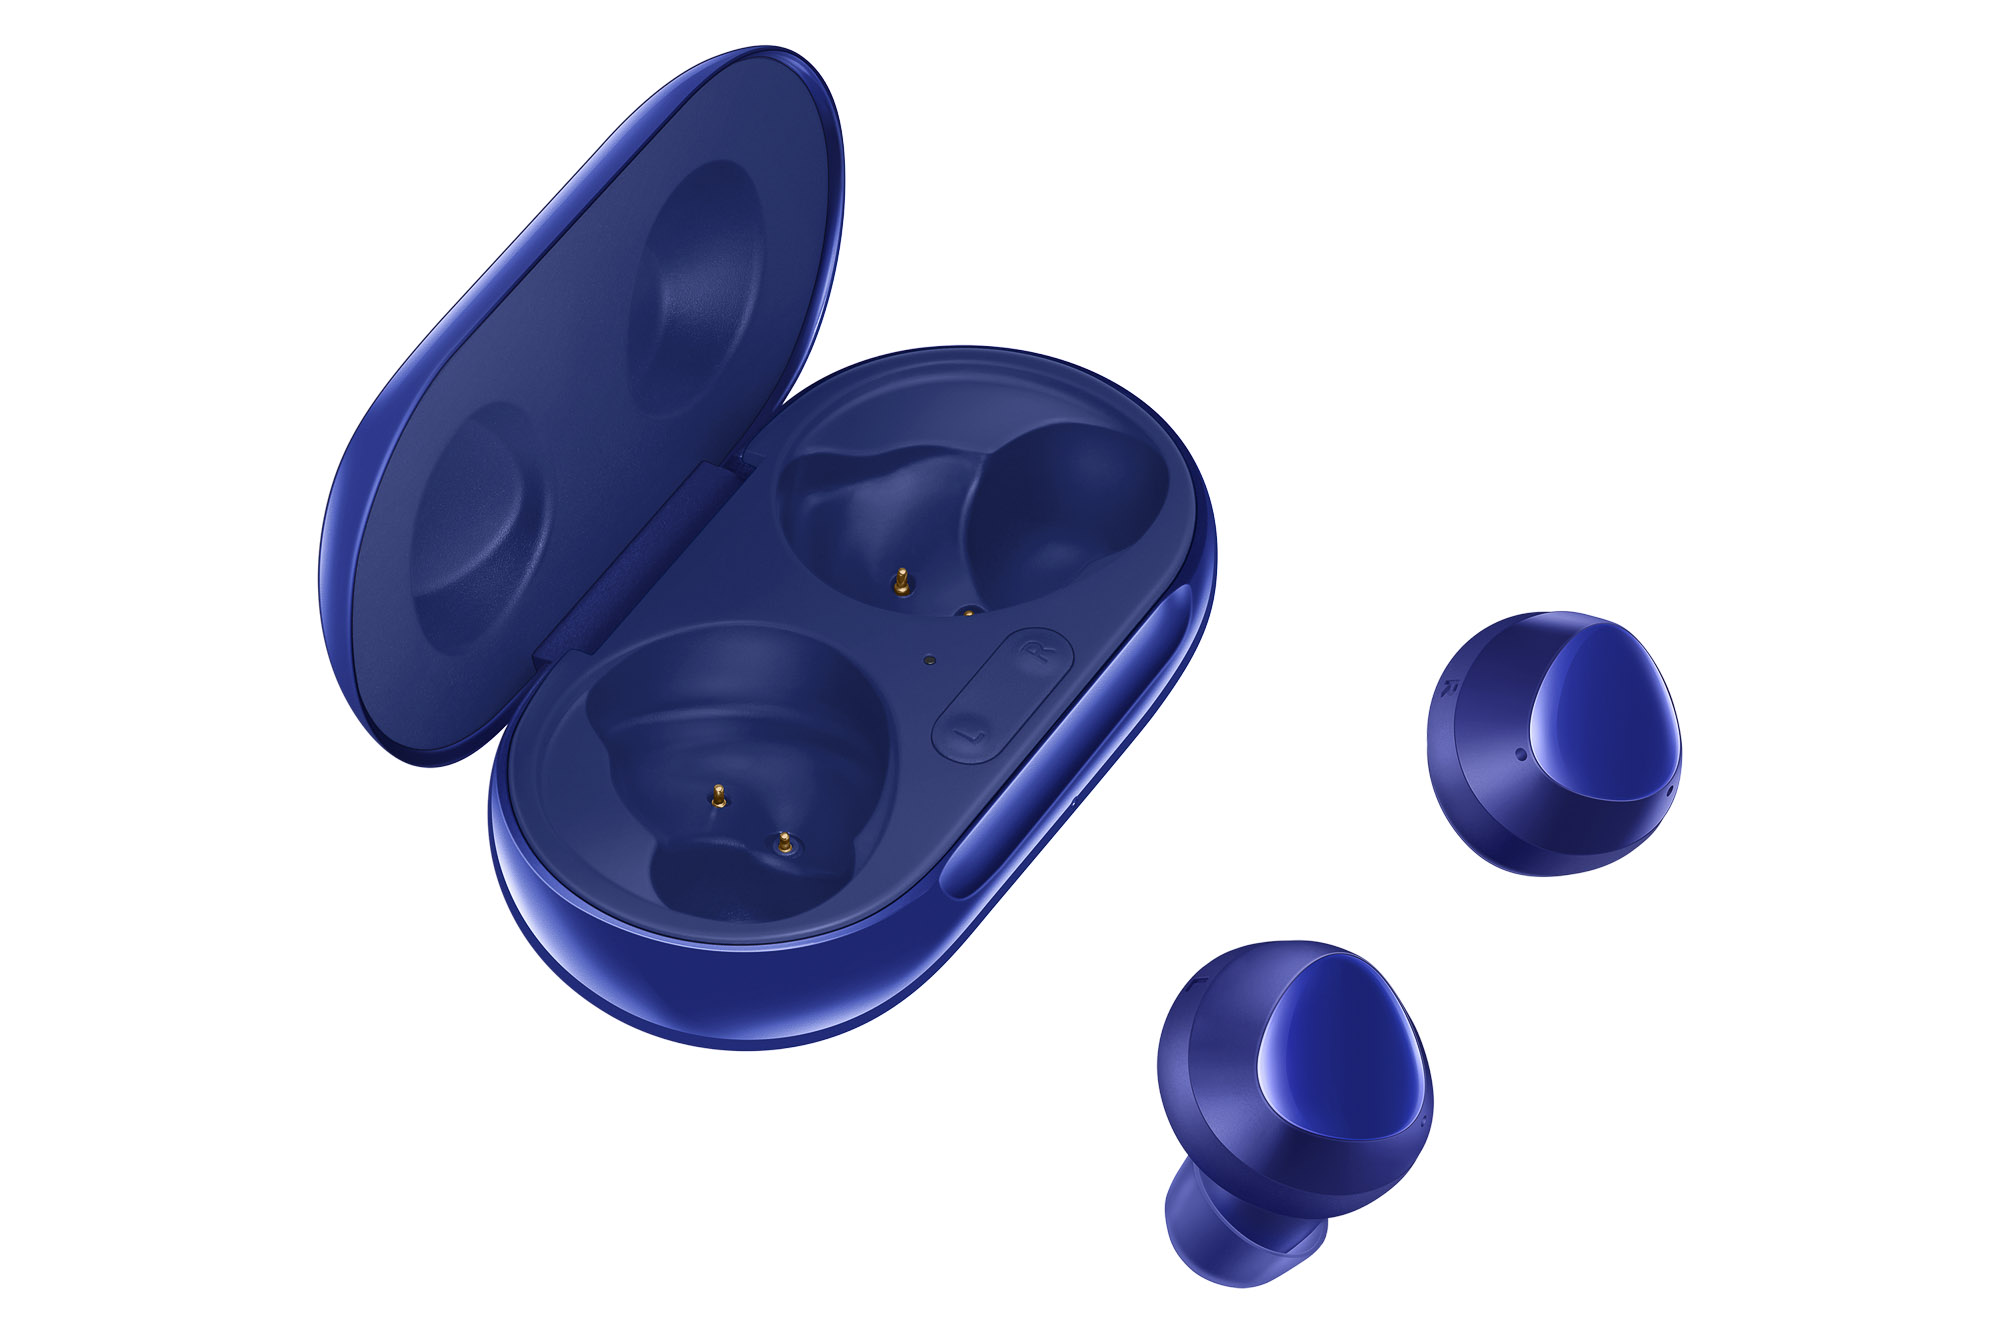 Samsung’s Galaxy Buds+ Now Available In Aura Blue | The Latest Hip-Hop